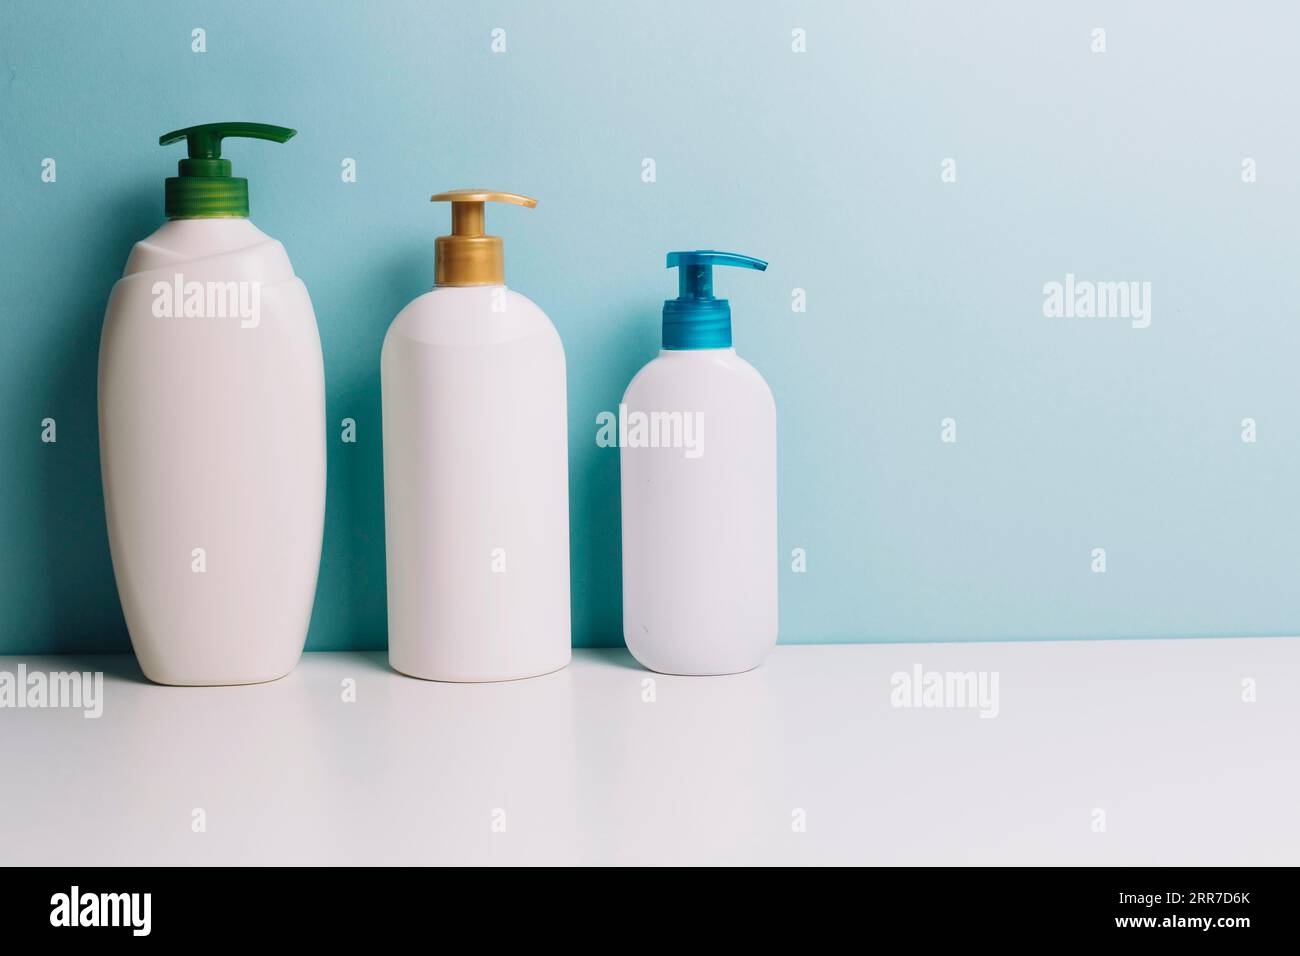 Cosmetics bottles with pumps Stock Photo